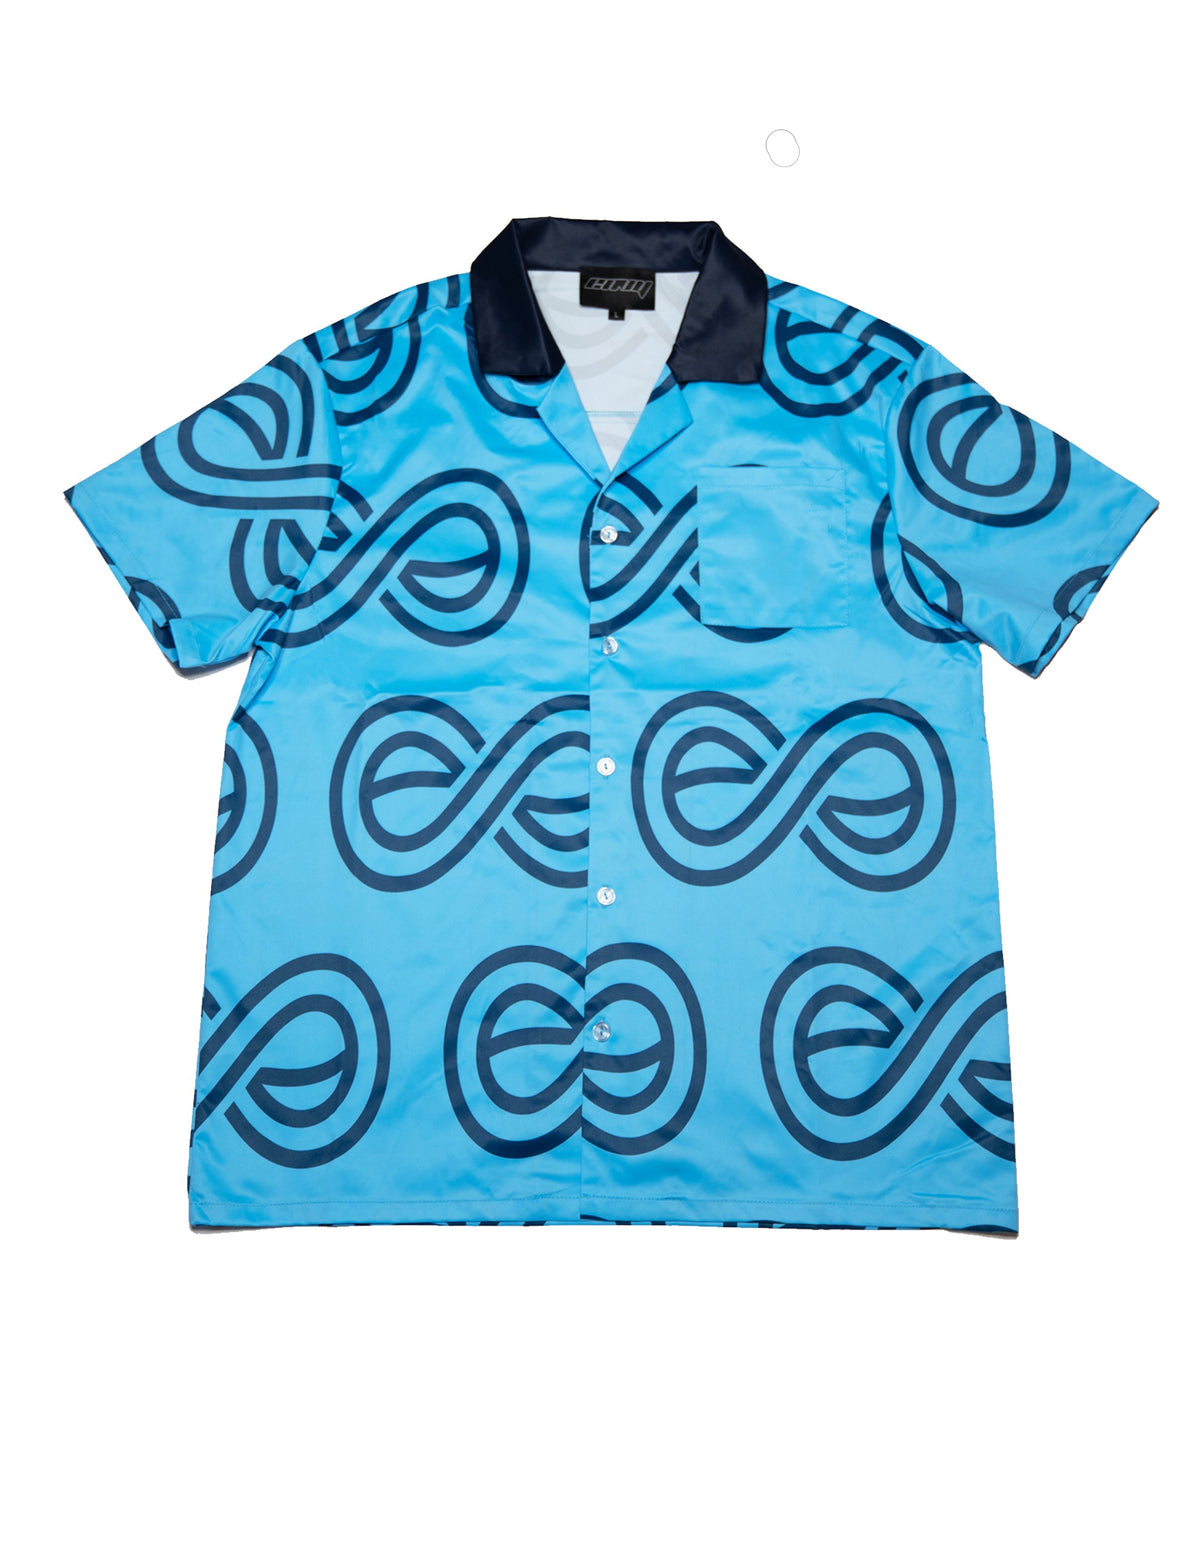 Envy Forever Monogram Button Down (Blue) - The Shade Room Shop